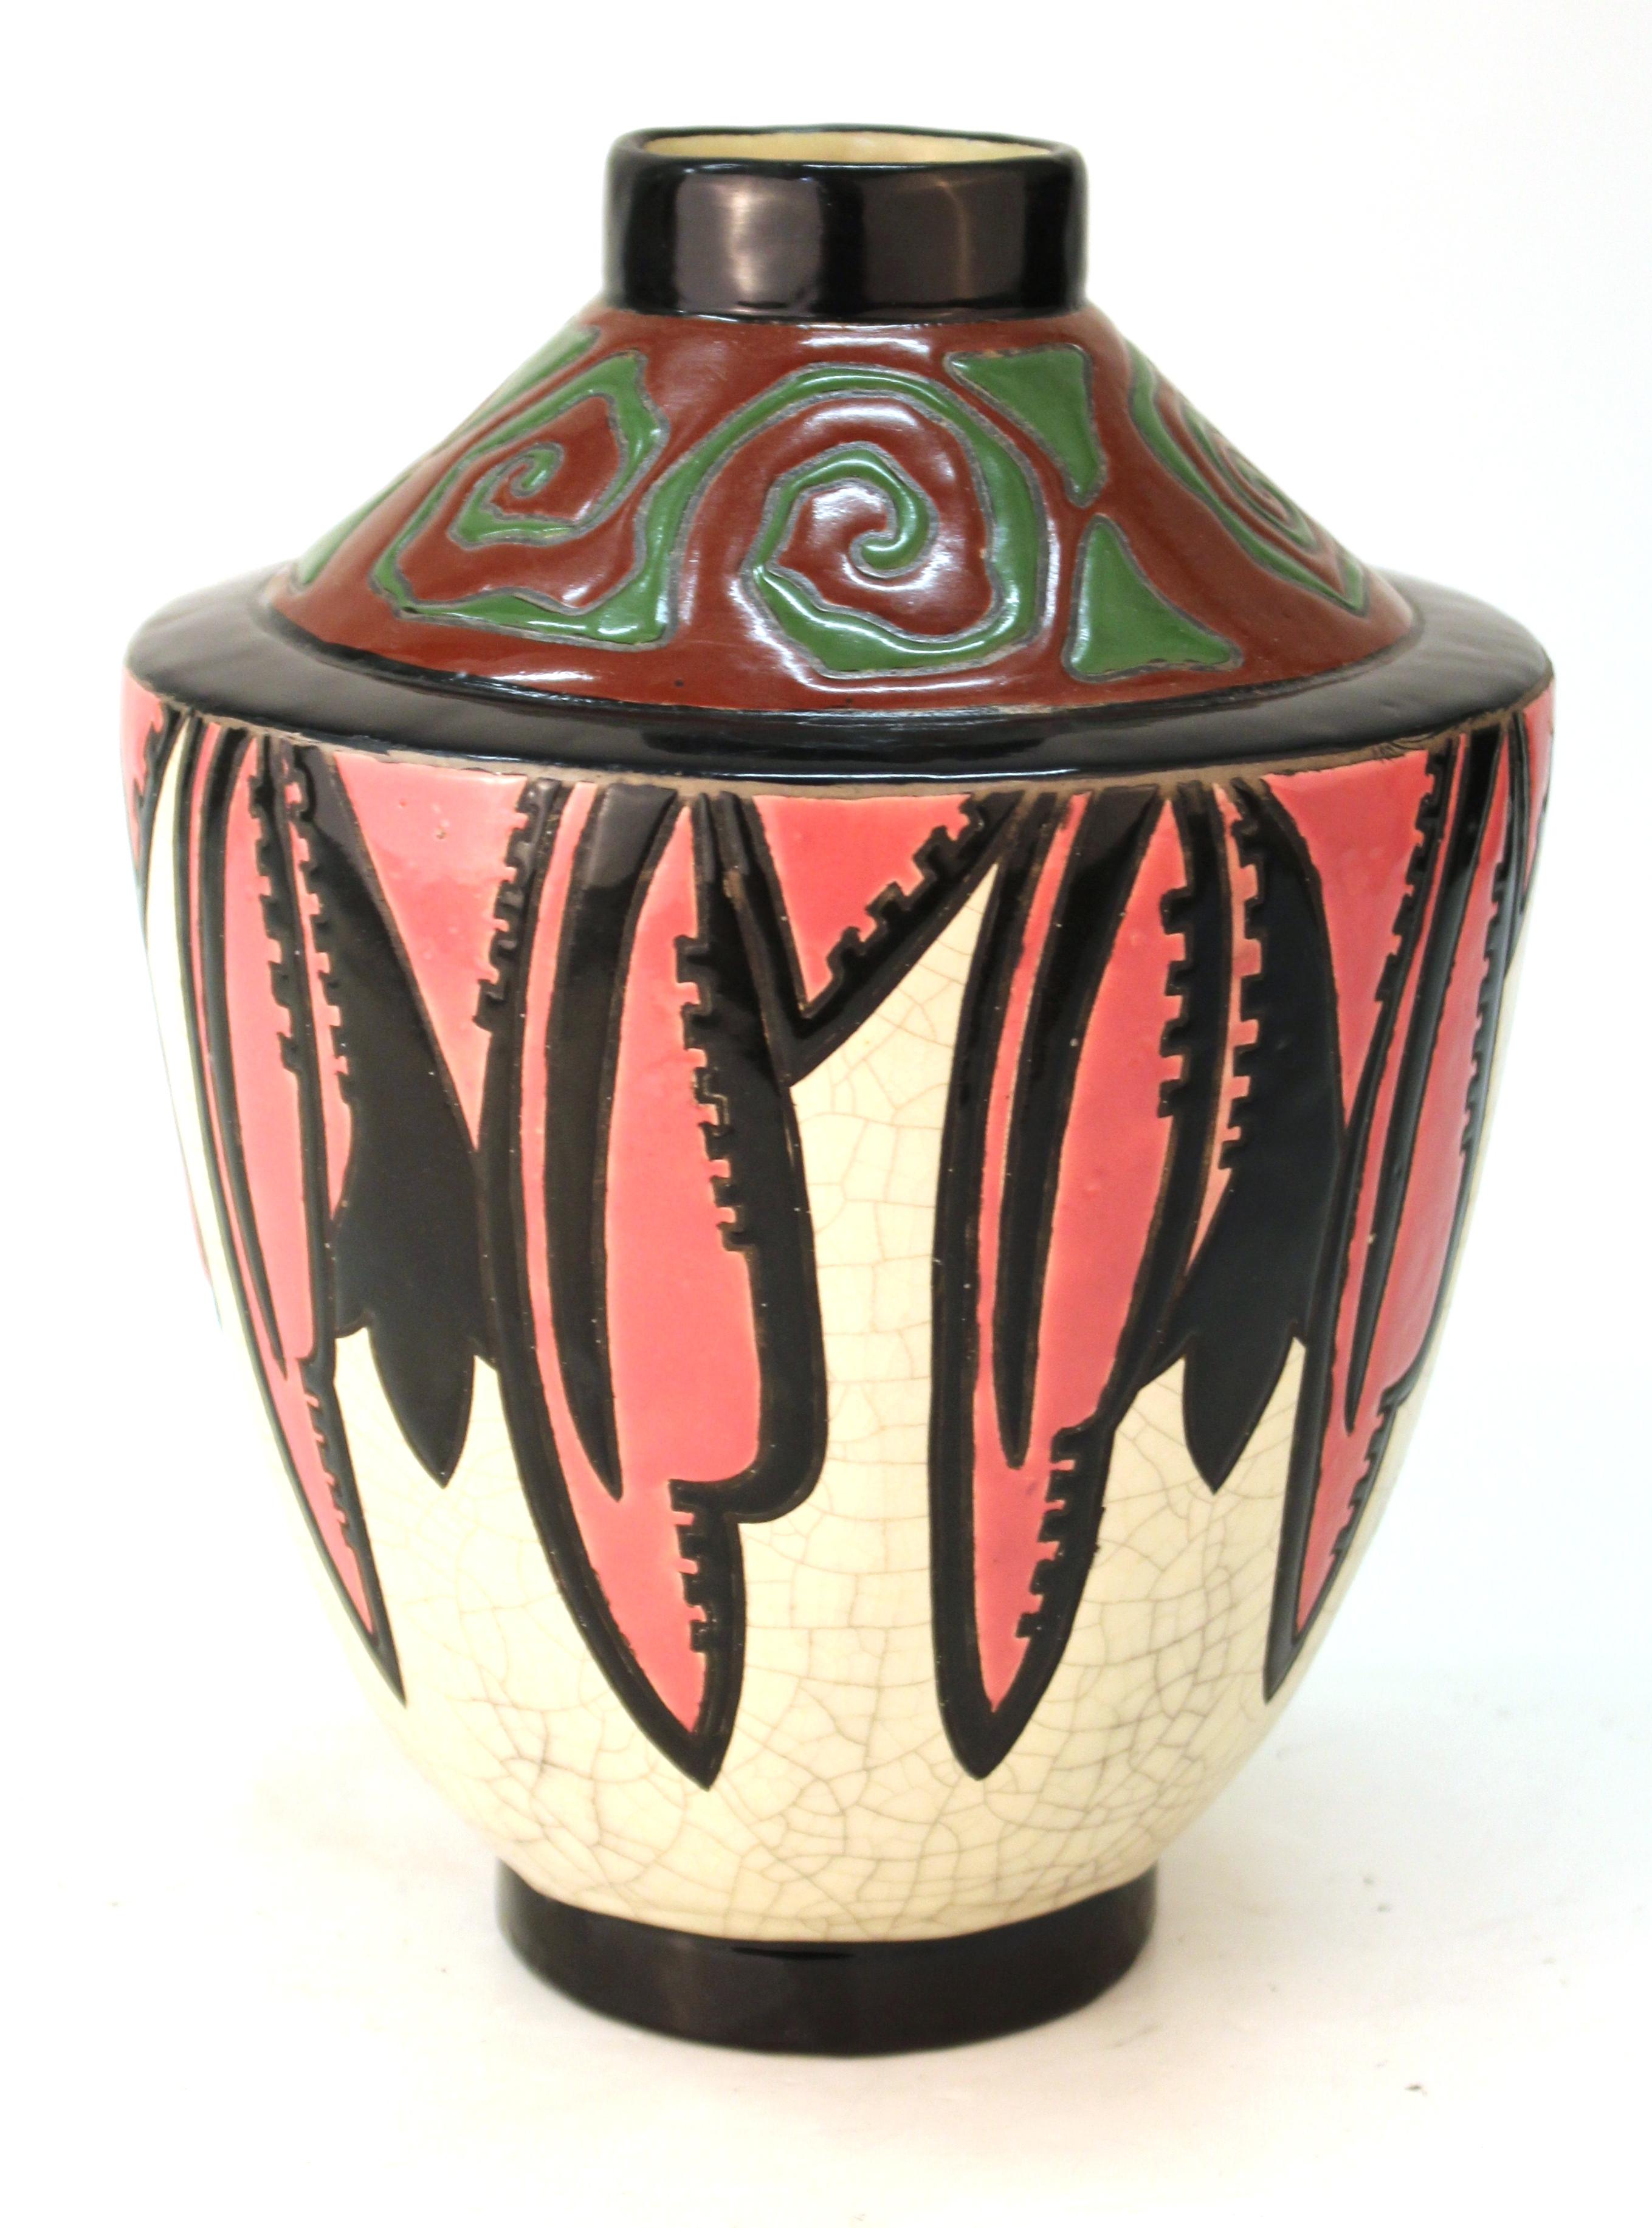 French Art Deco period ceramic vase created by Marcel Renson during the 1920s in Sceaux, near Paris. Makers mark and signature on the bottom. The piece is in great vintage condition with age-appropriate wear to the bottom.